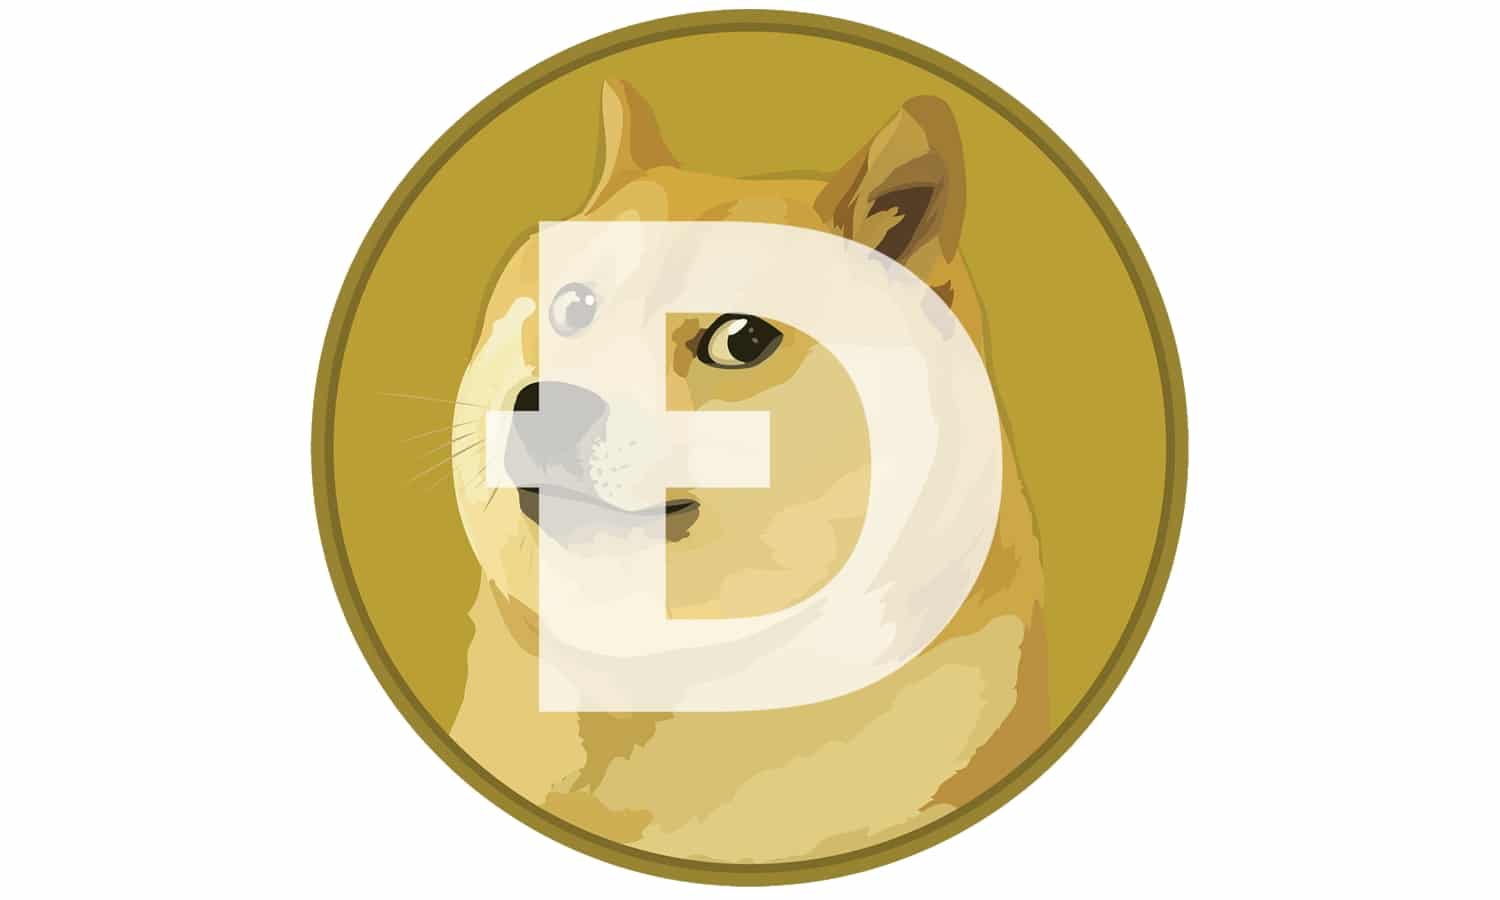 How to Mine Dogecoin in 3 Steps